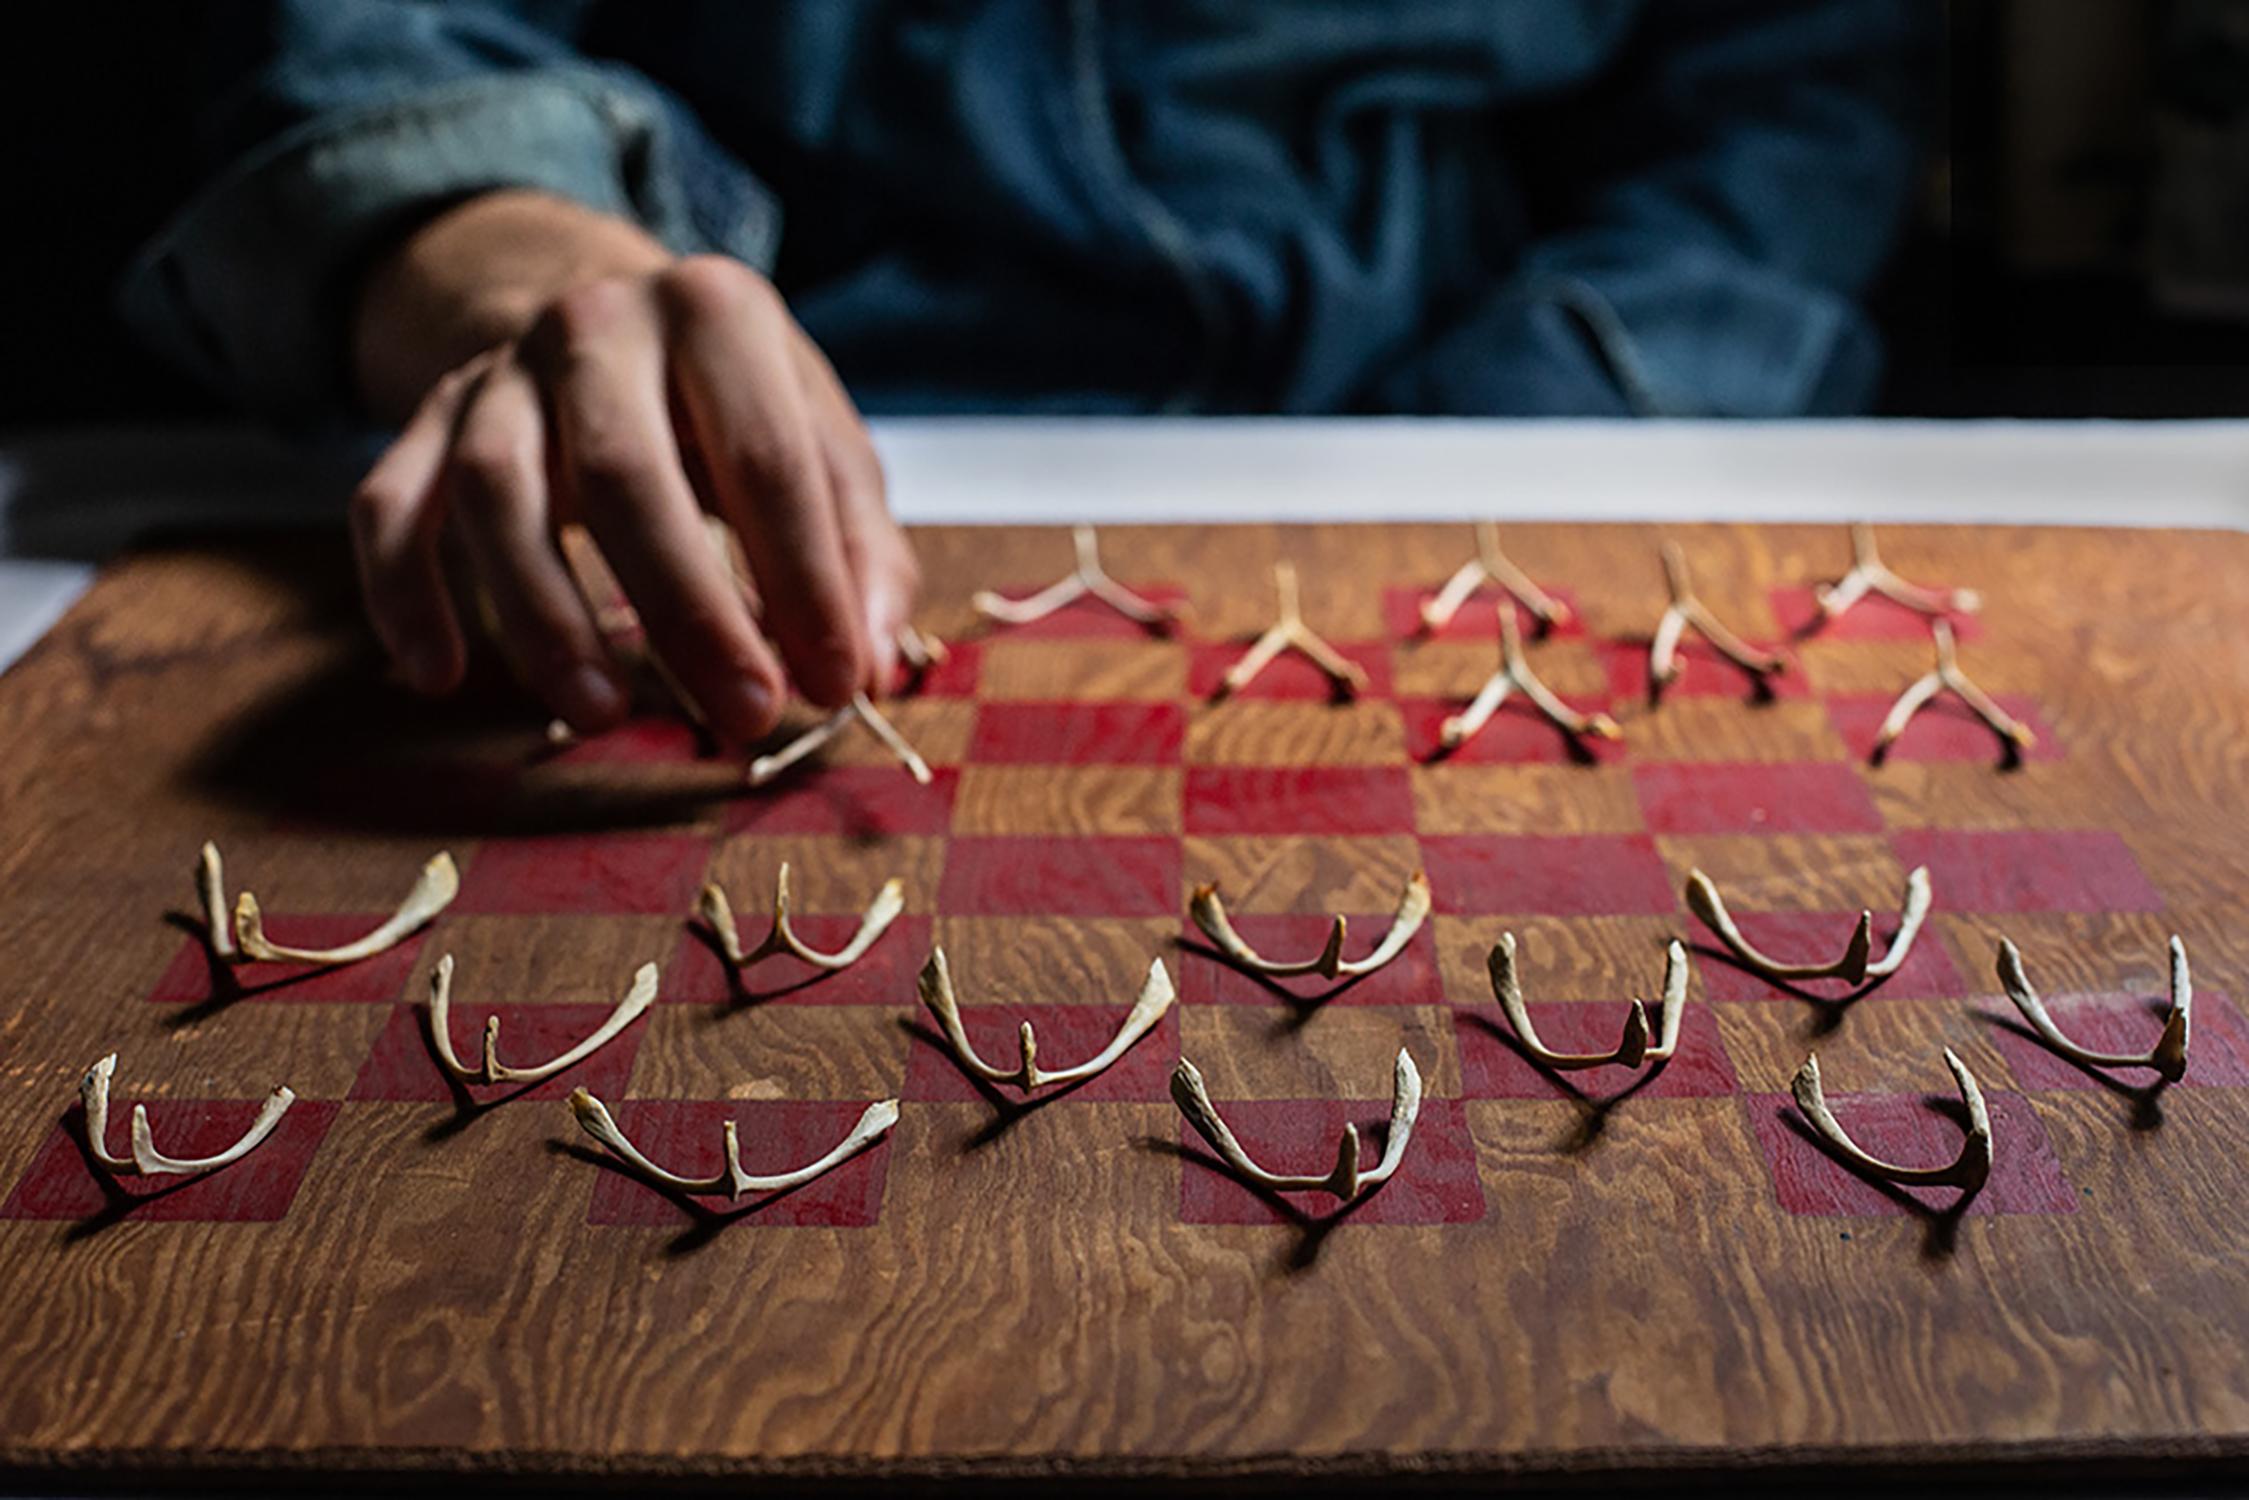 Shannon Davis Still-Life Photograph - "Played" - Southern, game, staged photography, luck, wish, red, checkers